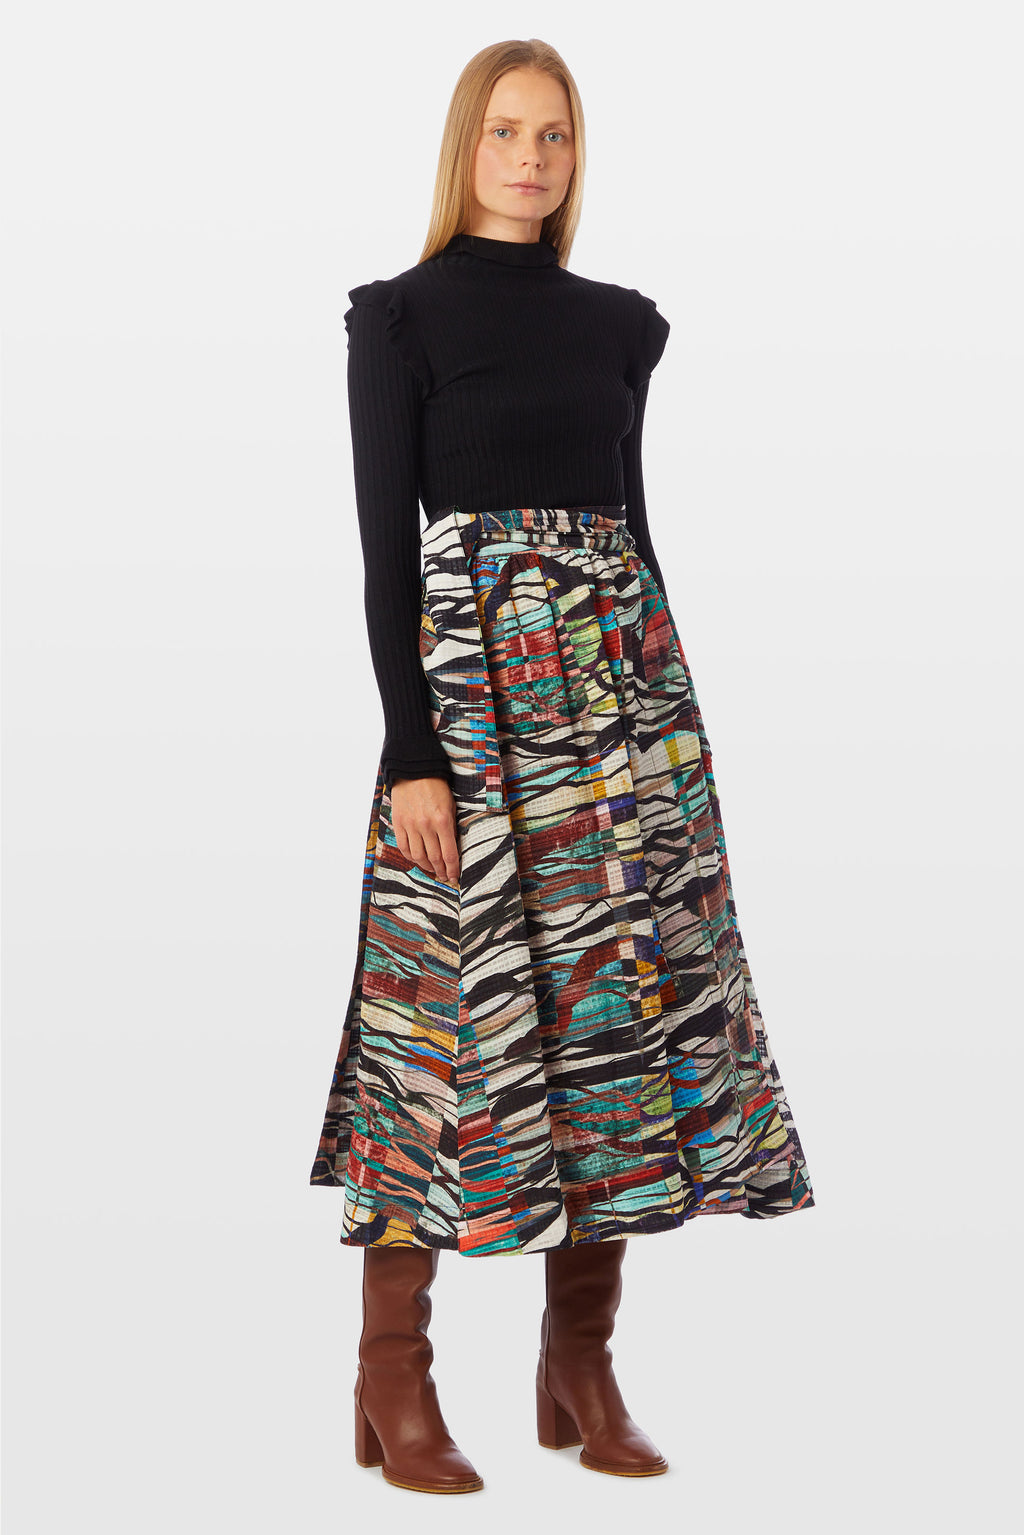 Traditional wrap skirt with long tie belt at the waist in a wavy multi-colored print